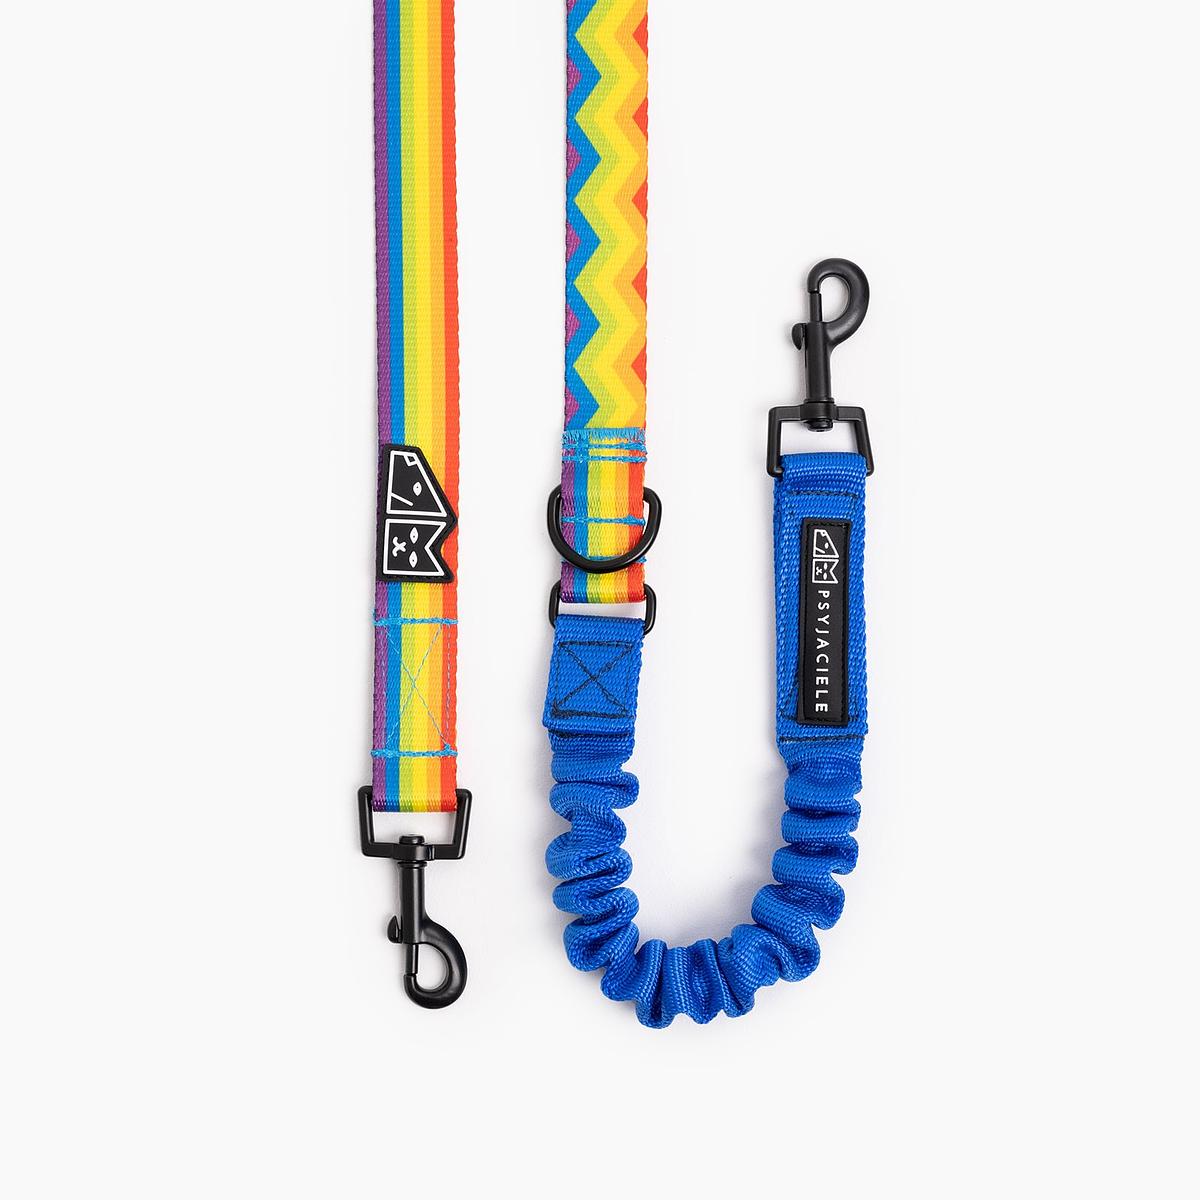 "Love, Equality, Teethers" leash with a shock absorber